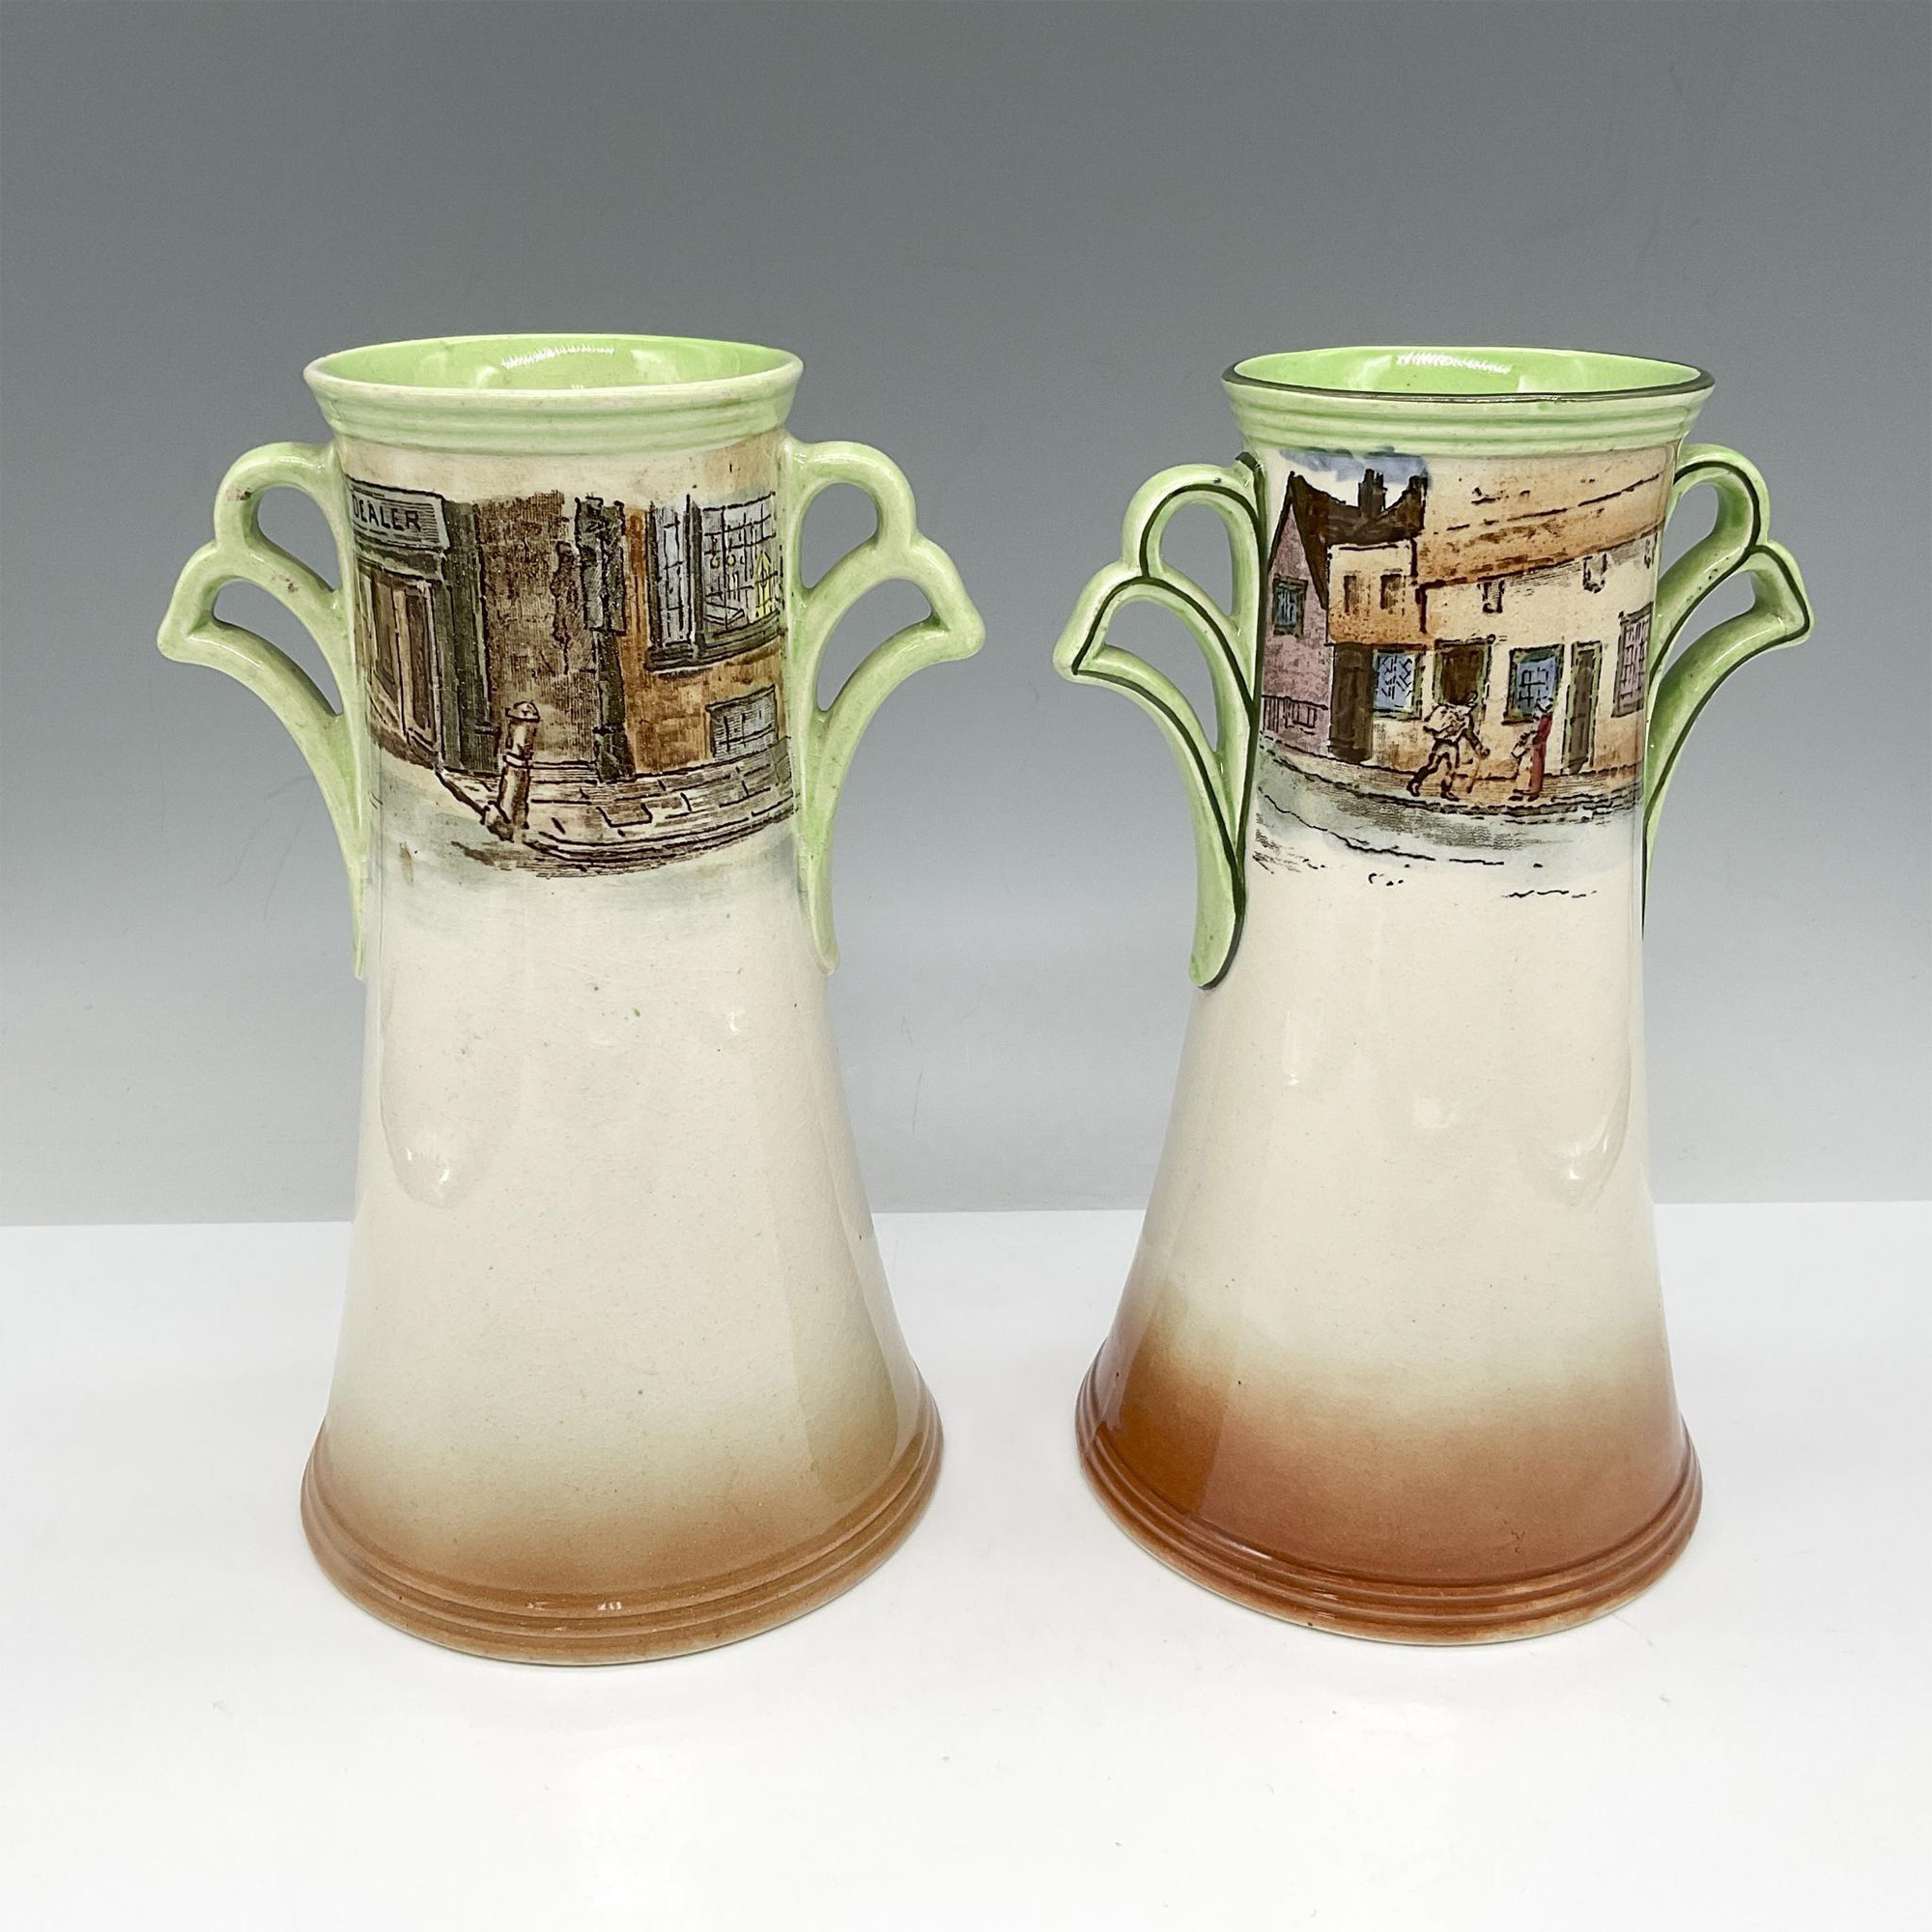 Pair of Royal Doulton Dickens Ware Vases - Image 2 of 3